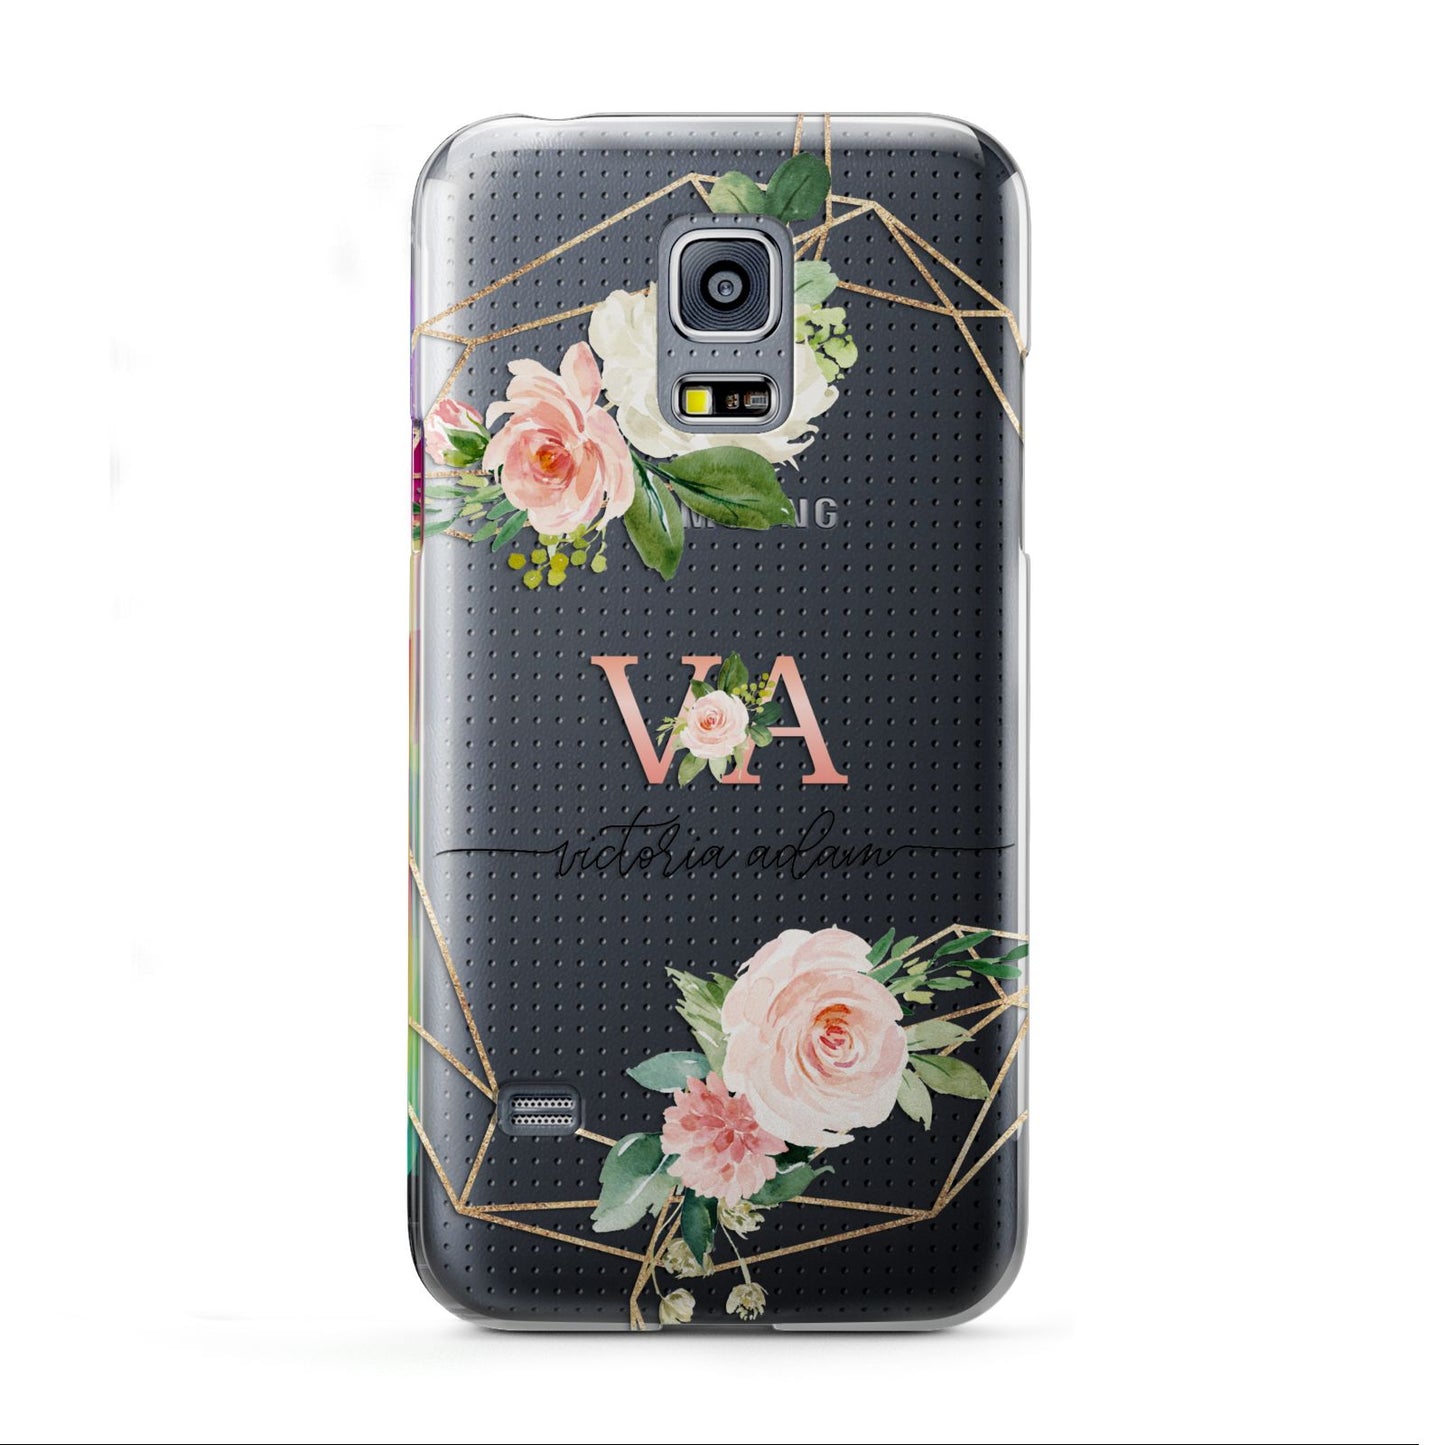 Blush Pink Rose Floral Personalised Samsung Galaxy S5 Mini Case